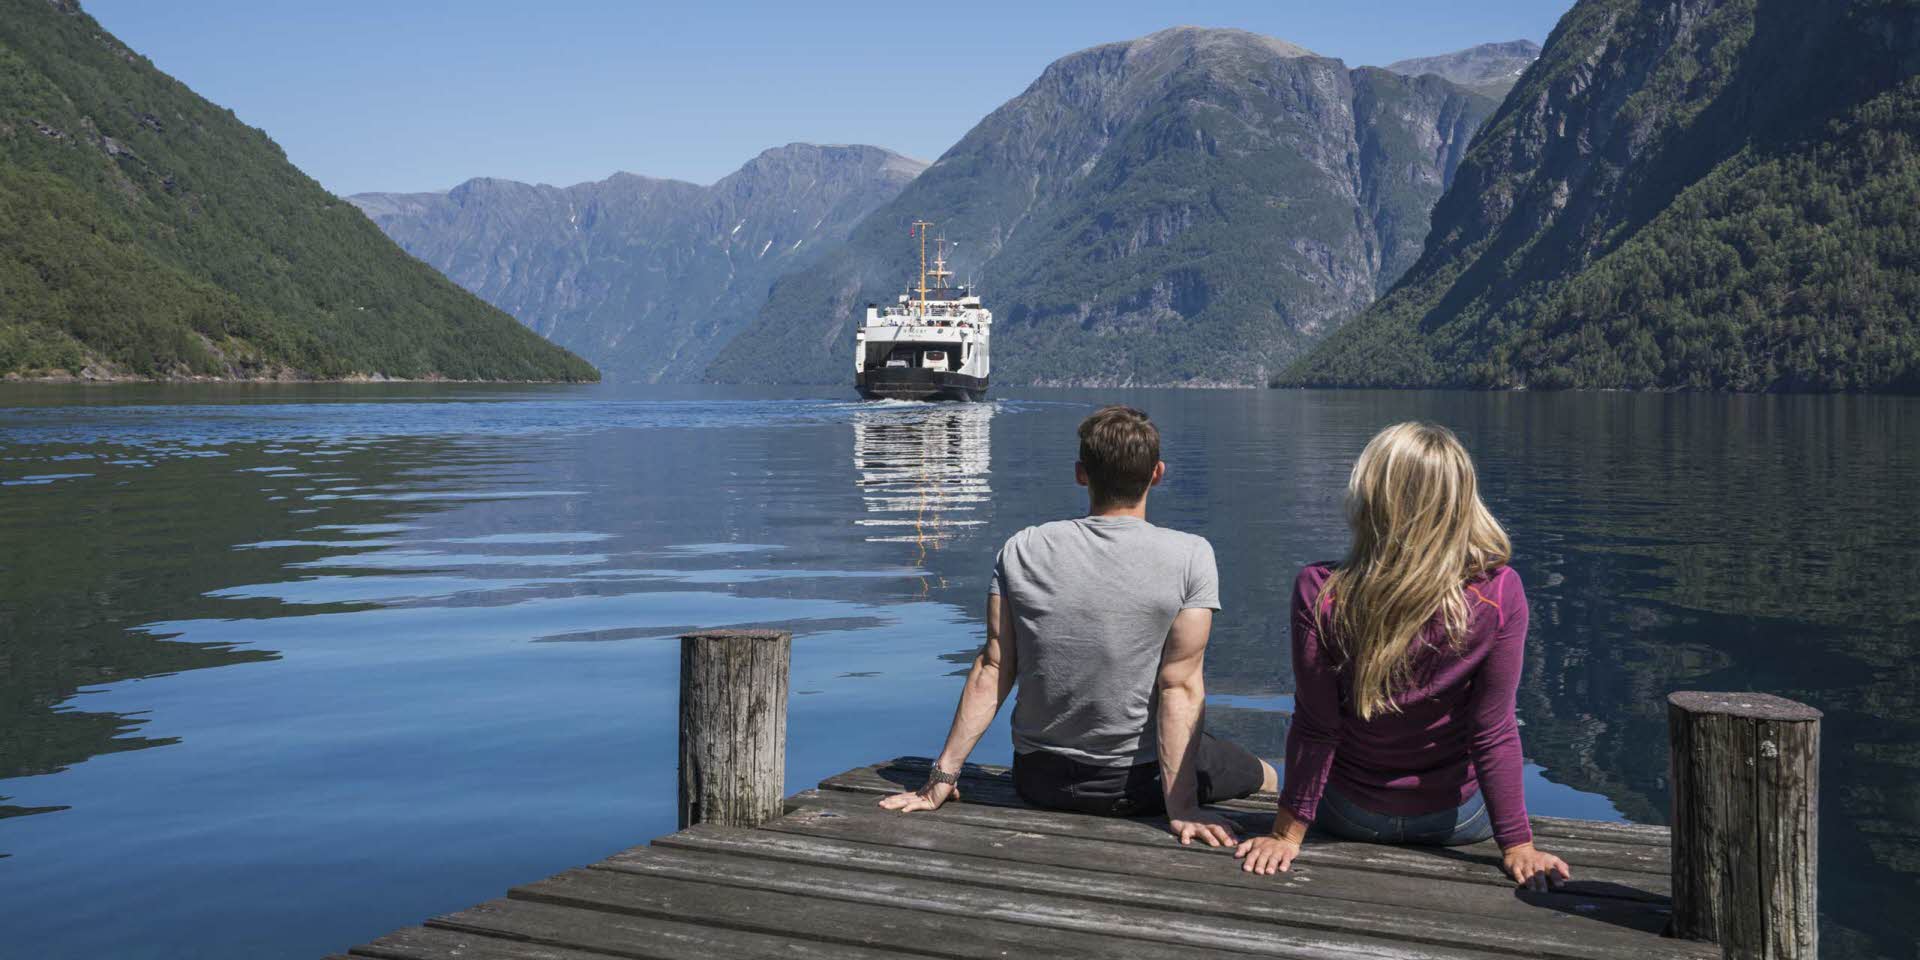 A woman and a man sitting on a wharf by the Geirangerfjord watching a ferry sailing